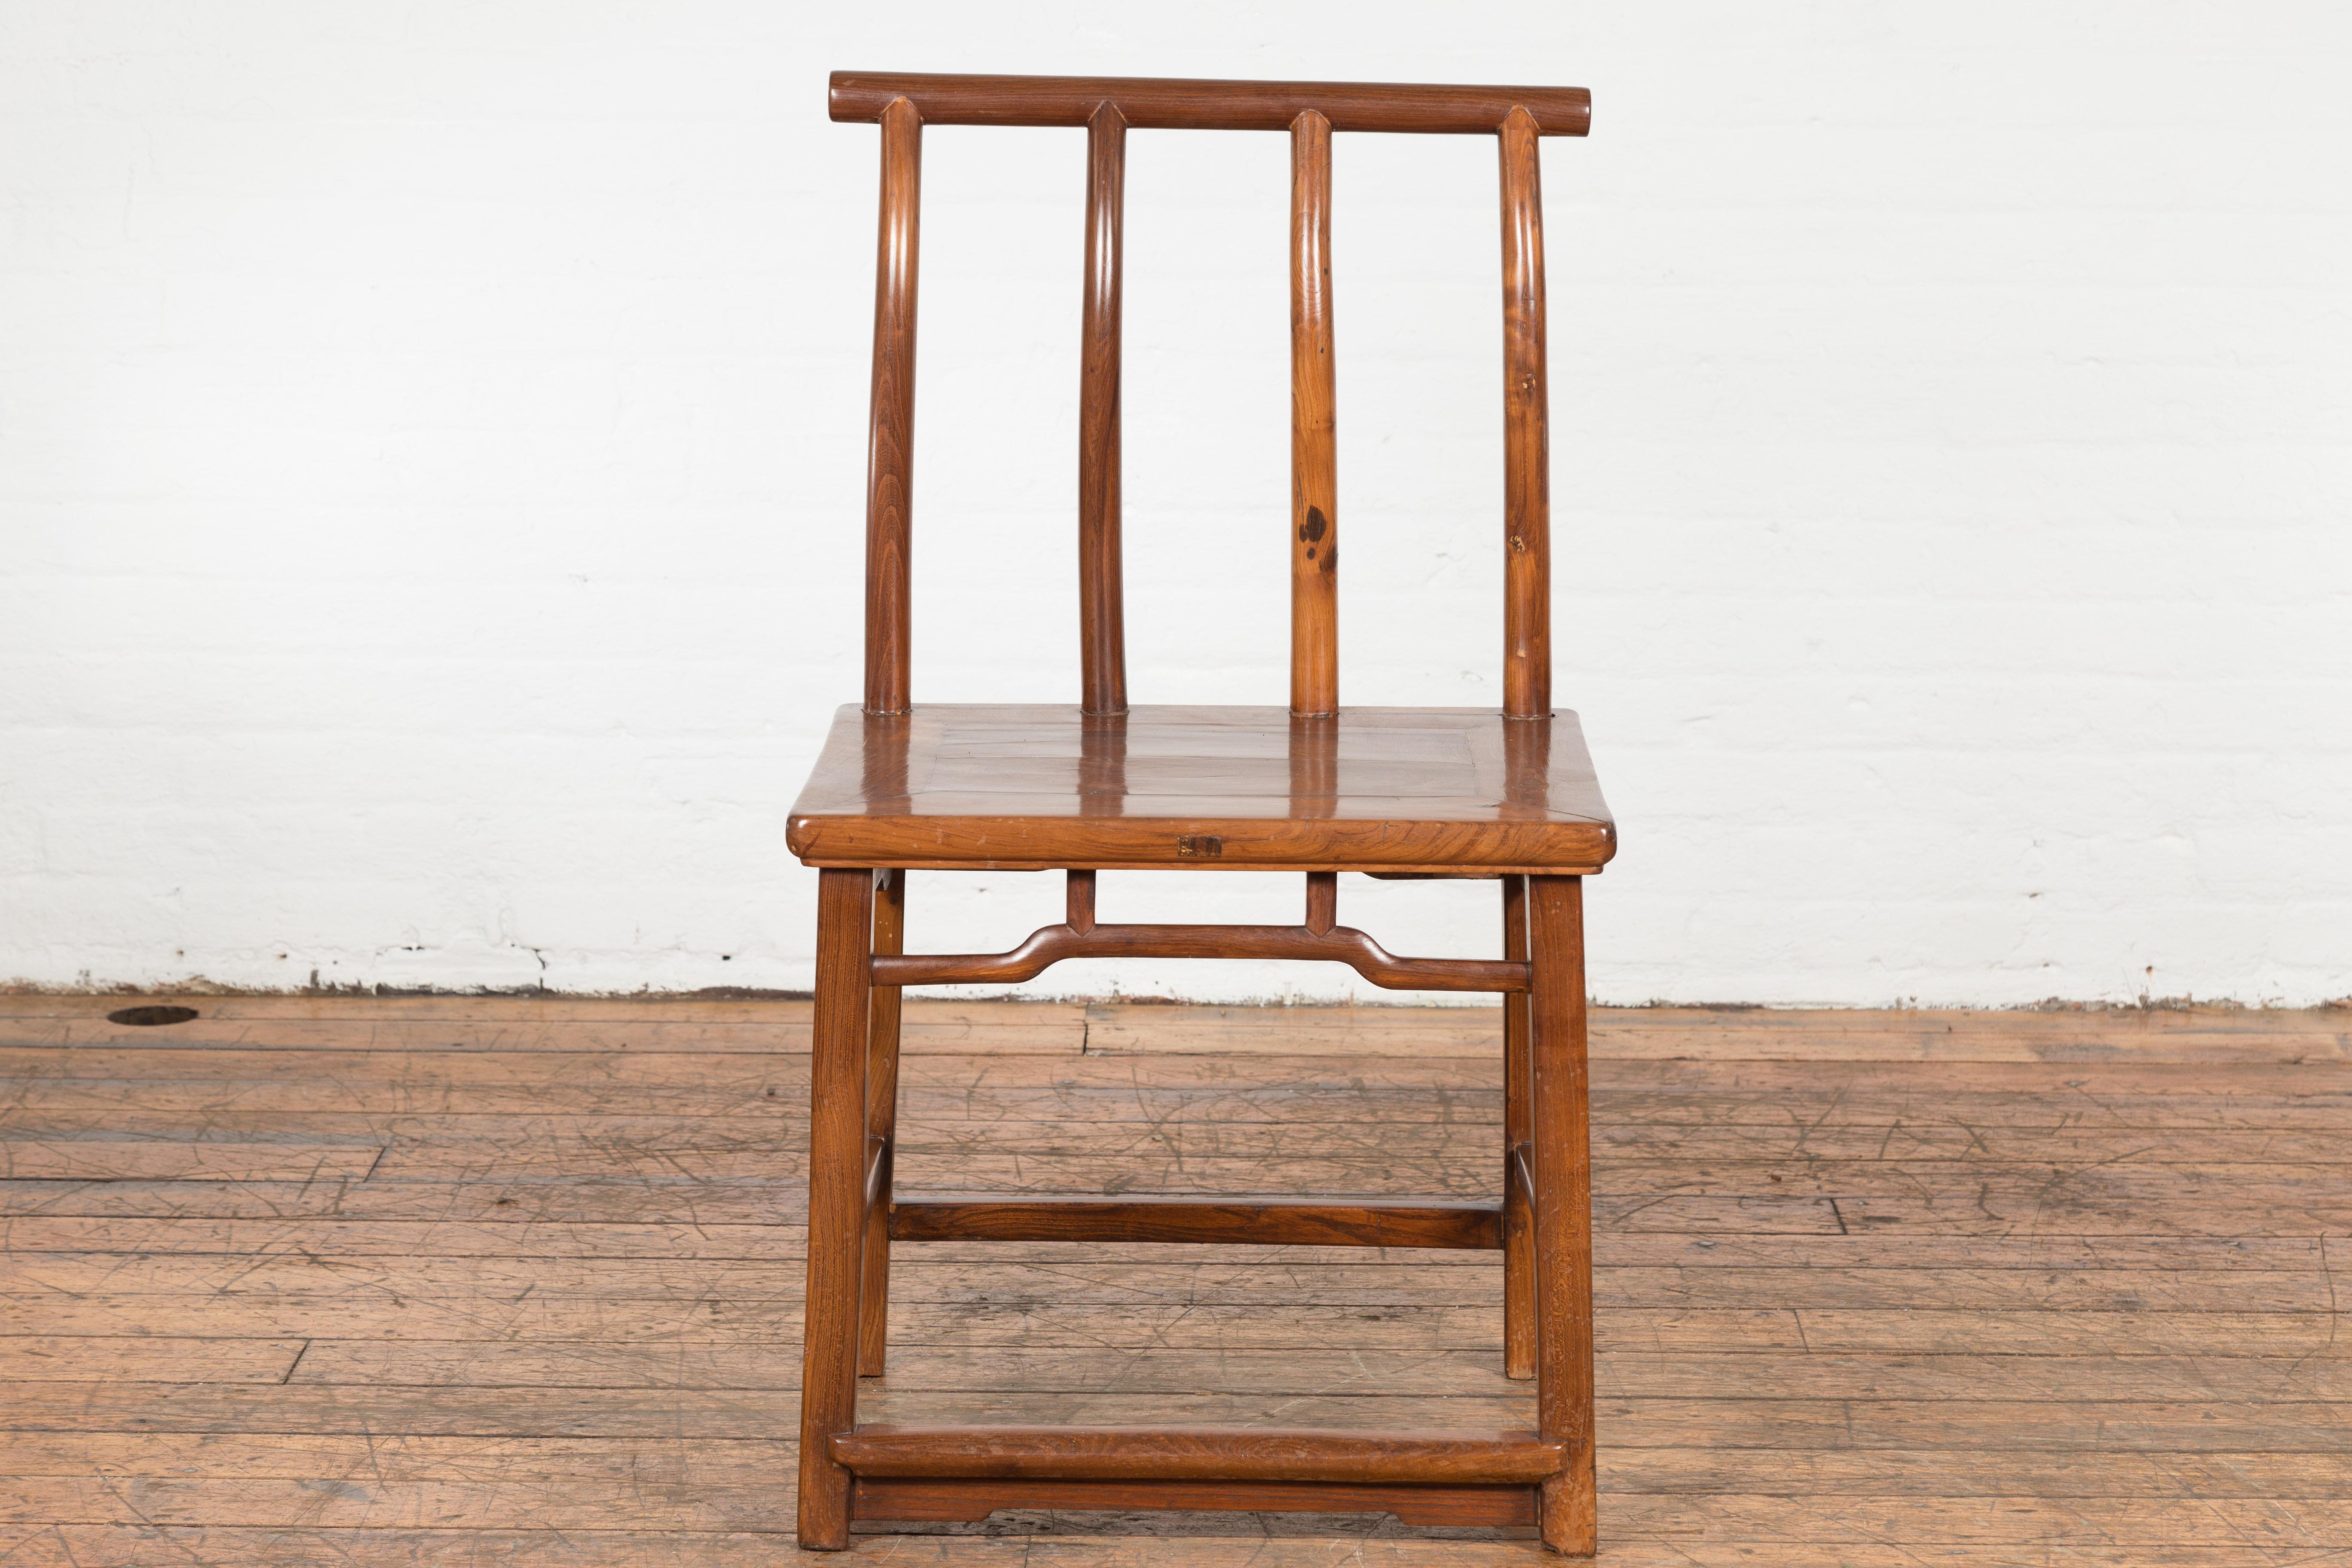 A Chinese late Qing Dynasty period chair from the early 20th century with vertical slats, pierced apron, pillar strut motifs and humpback stretchers. Exuding the richness of Chinese history, this early 20th century chair hails from the late Qing